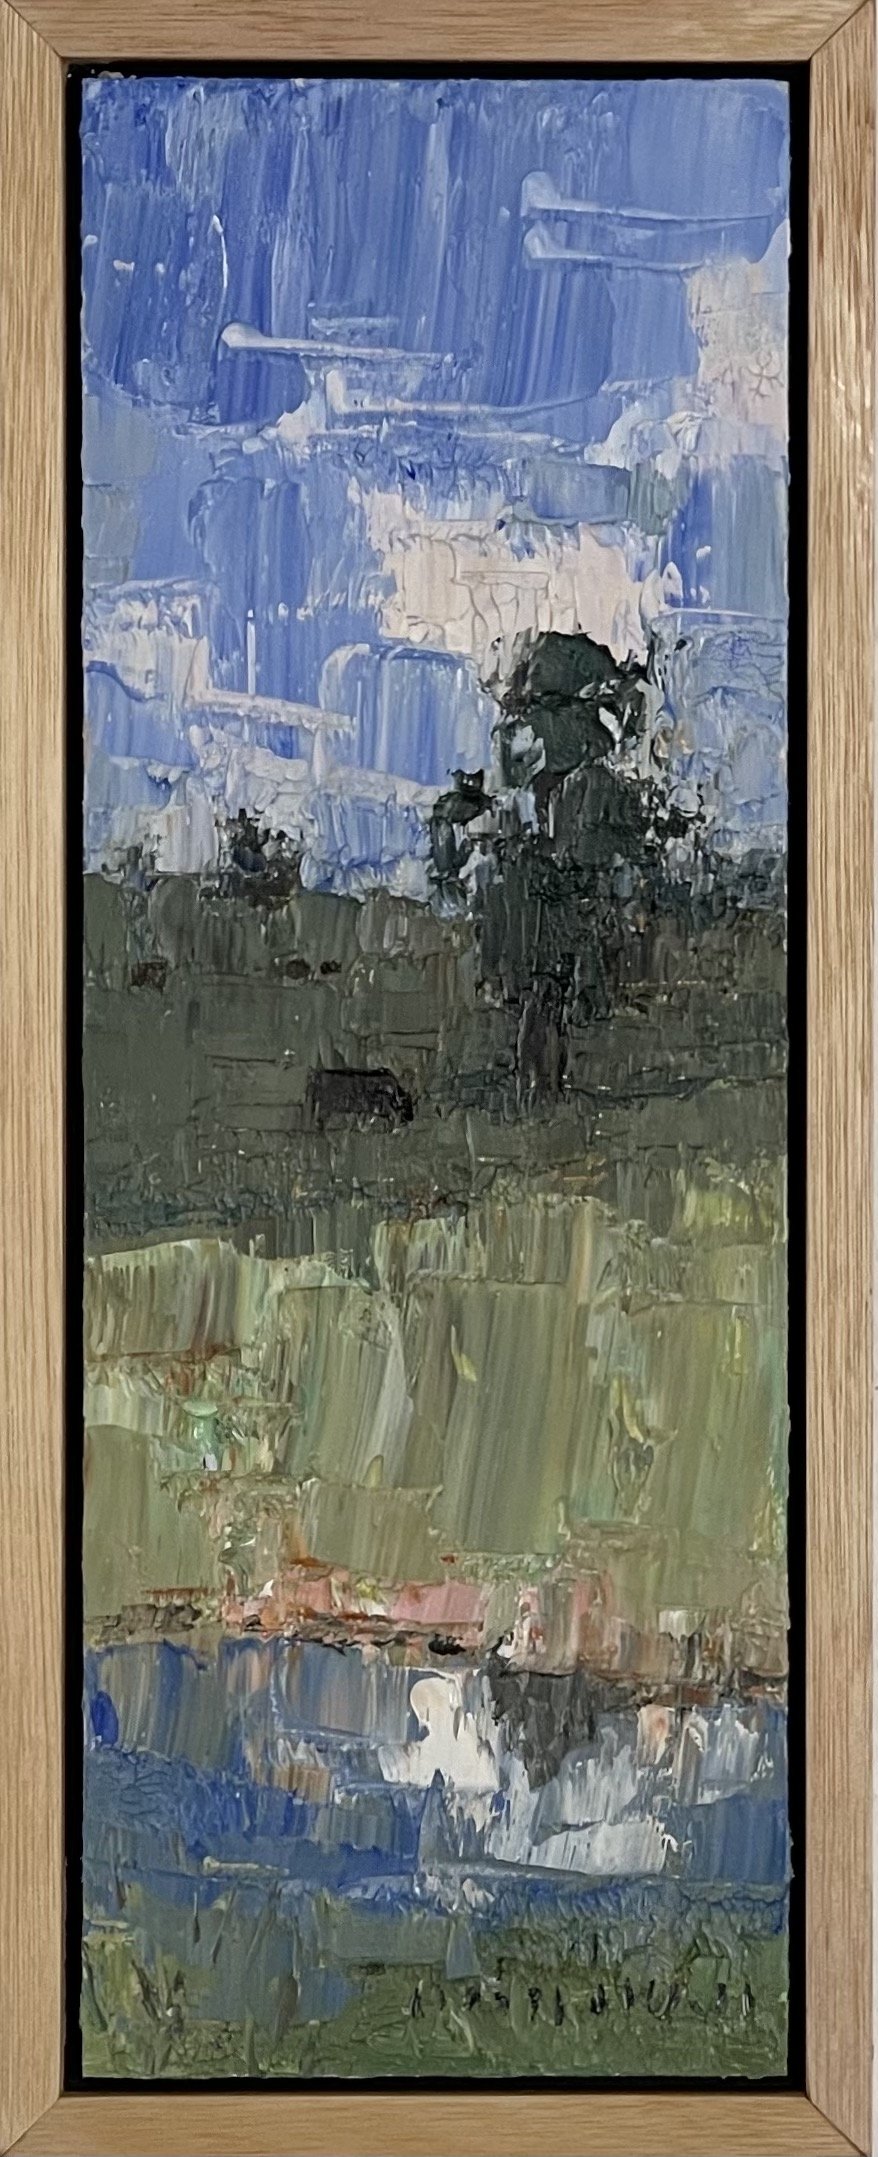 MINHAN CHO Reflecting Tranquility 36x13cm framed oil on board $900